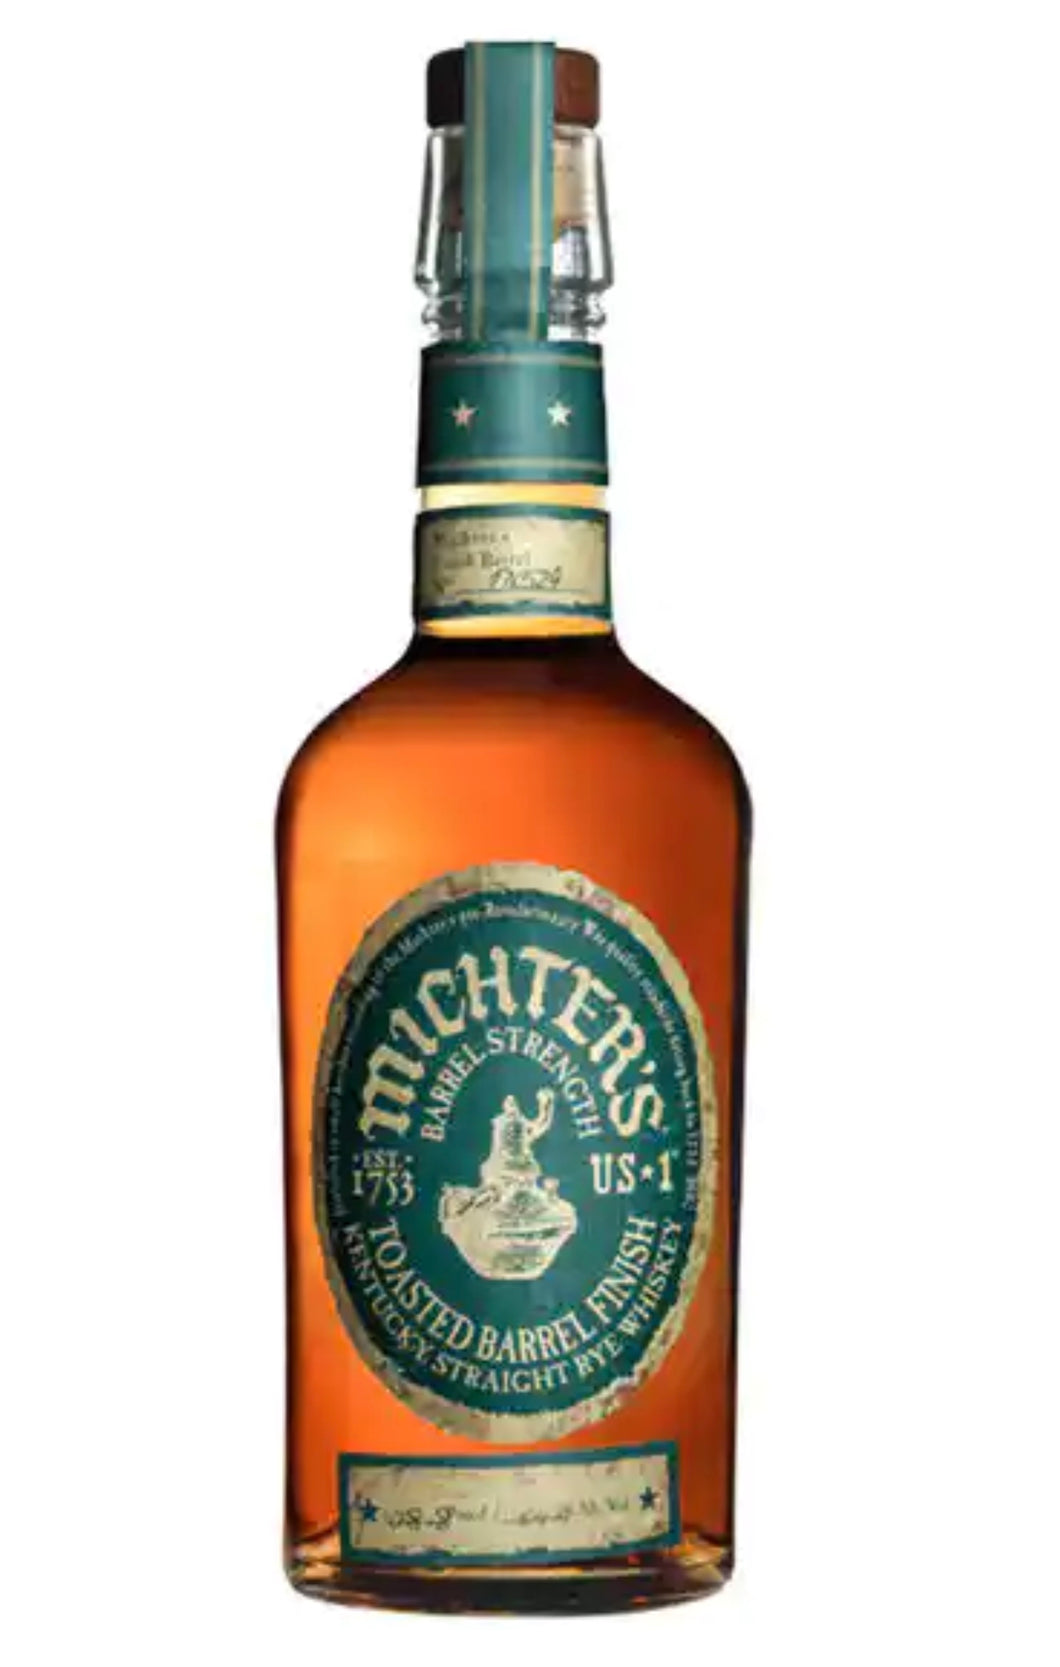 Michter’s US1 Toasted Barrel Finish Rye